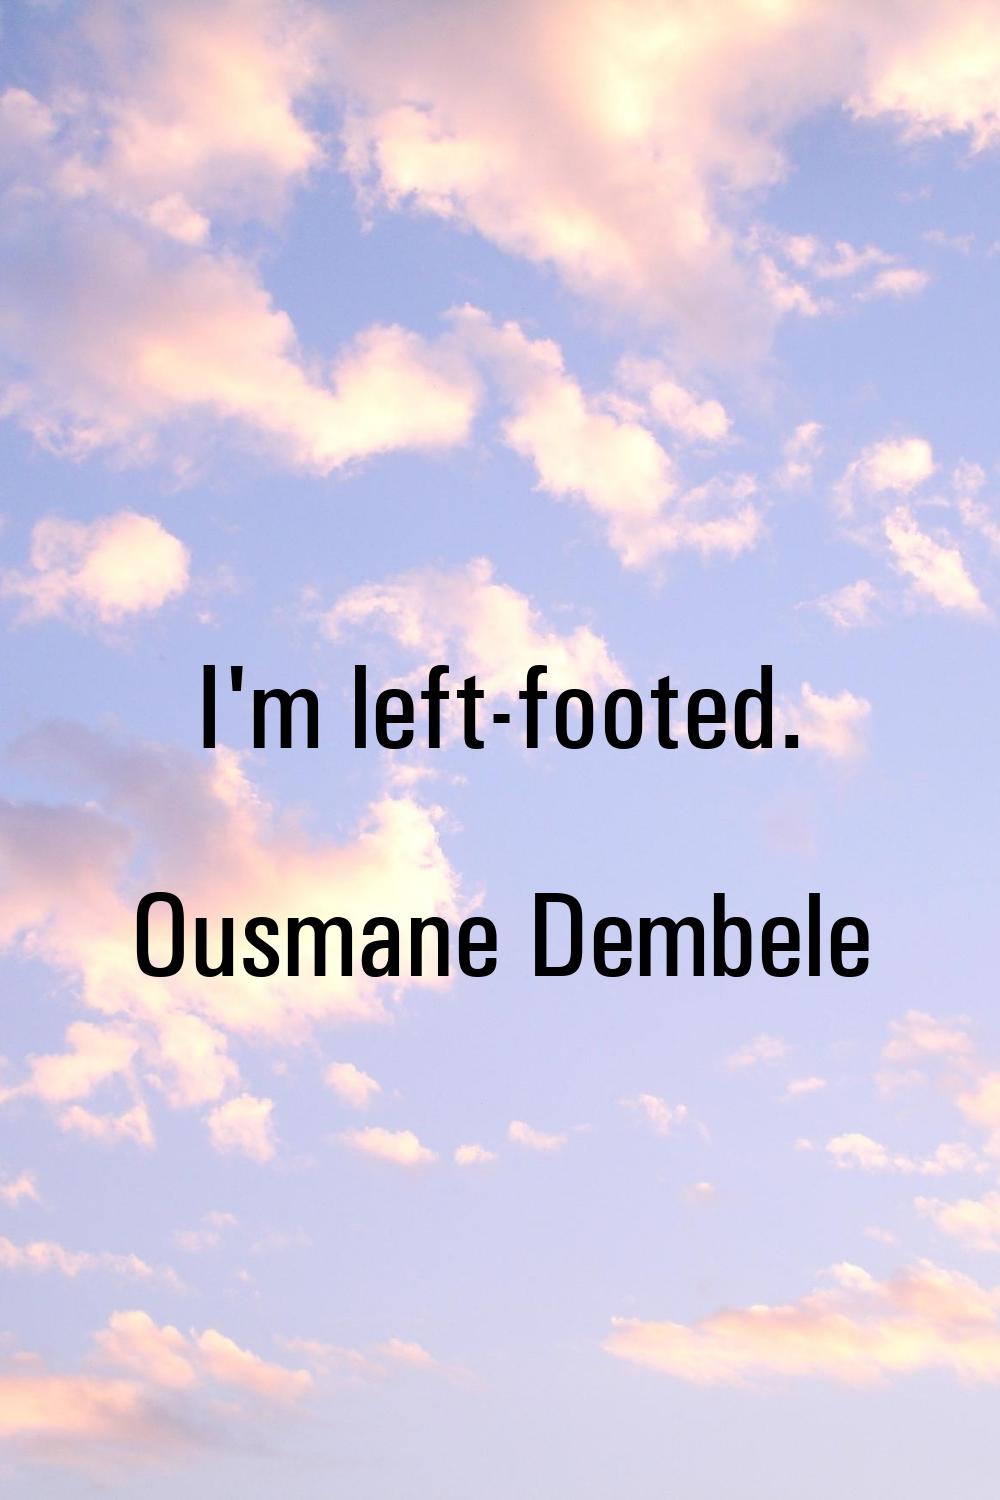 I'm left-footed.